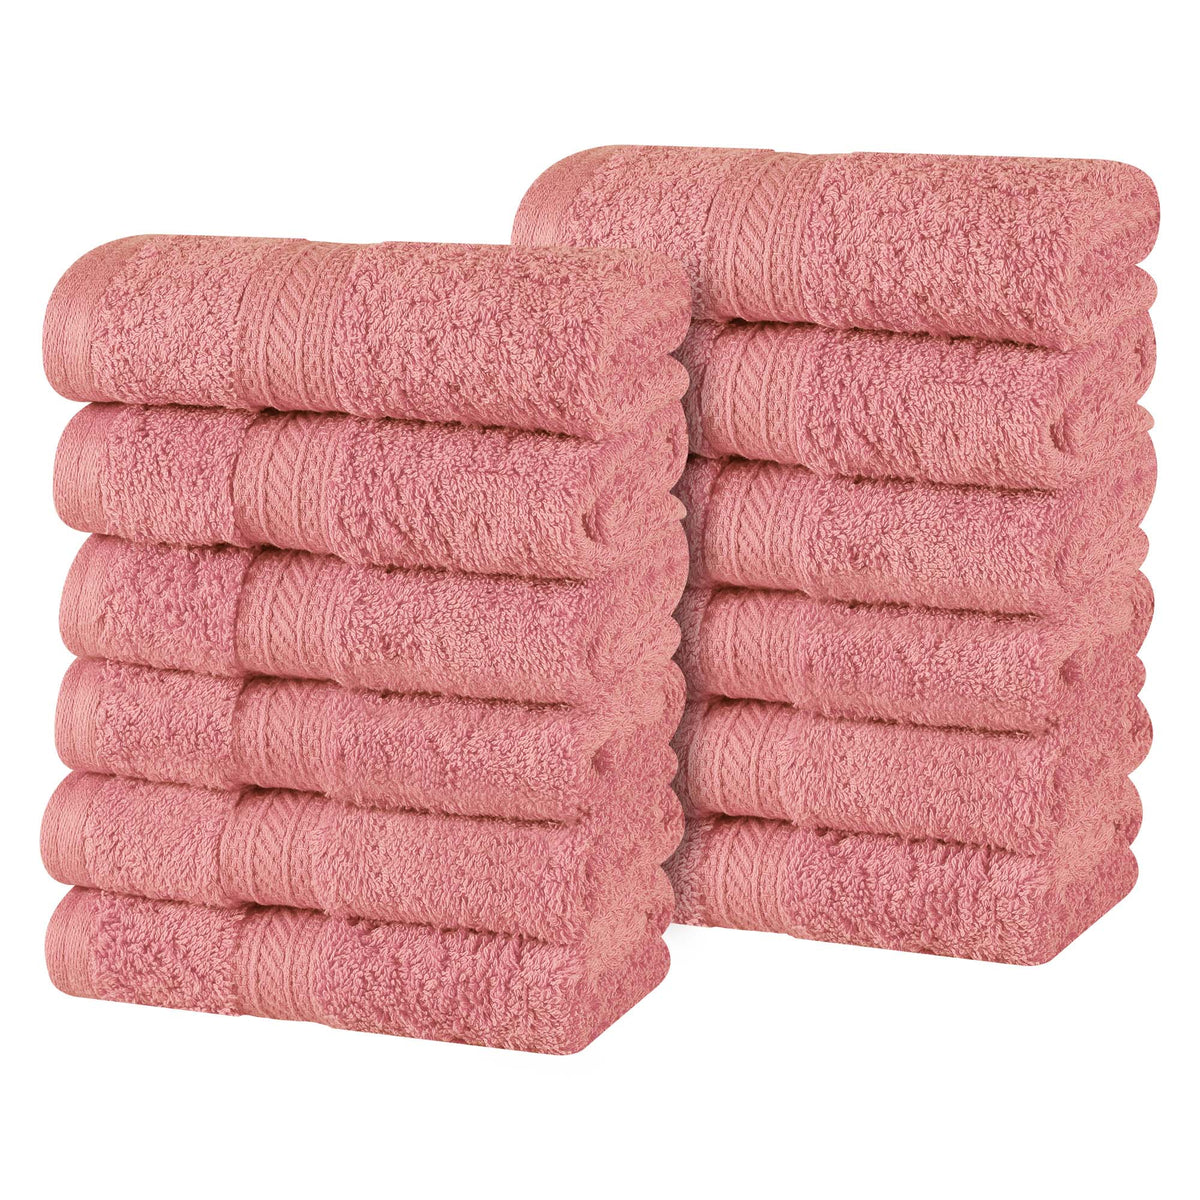 Atlas Combed Cotton Highly Absorbent Solid Face Towels / Washcloths Set of 12 - Blush